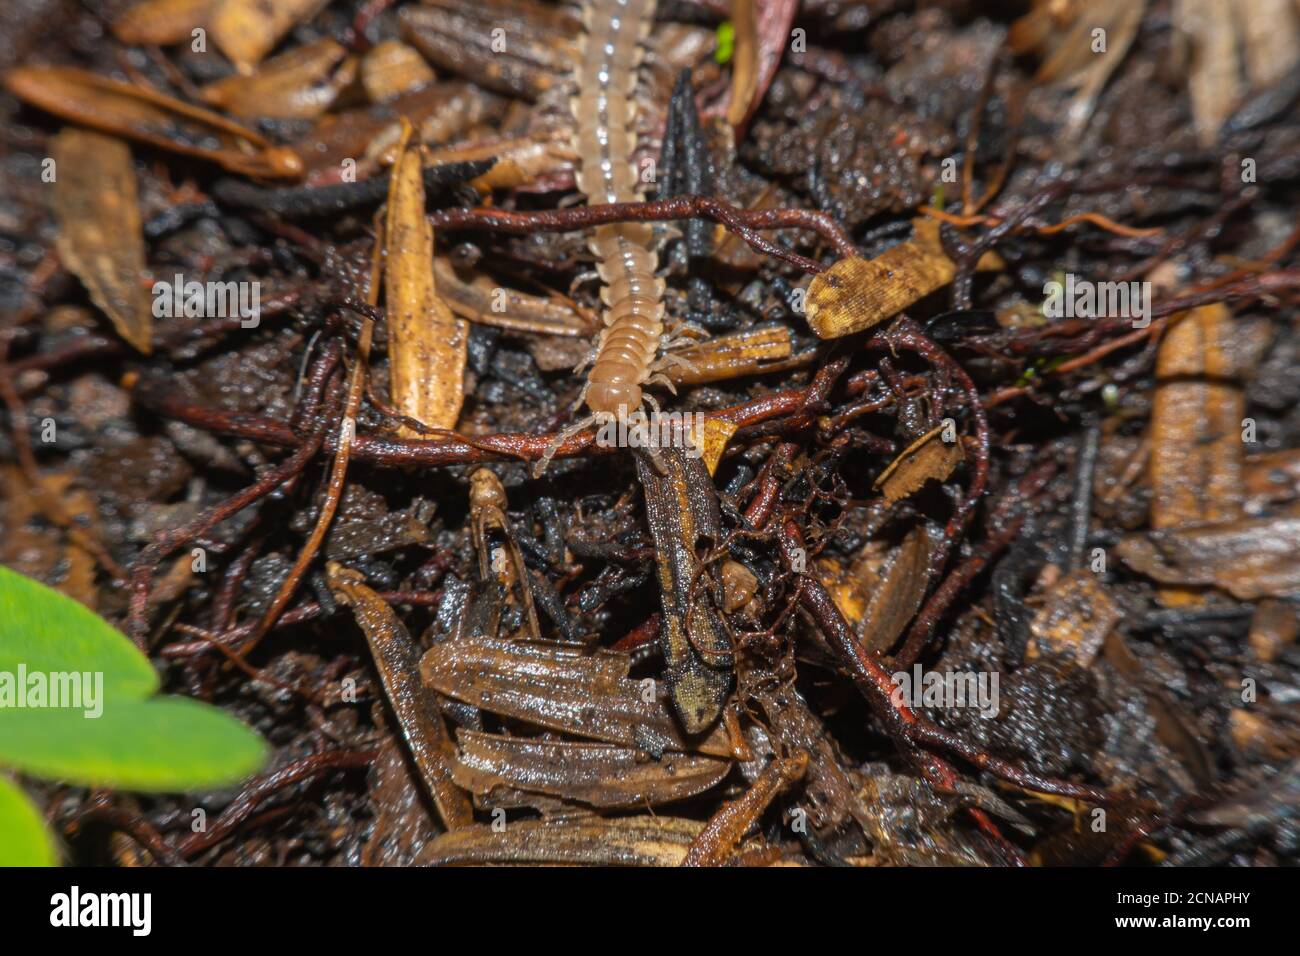 Earthworm is moving into the wet ground.Close up of the earthworm taken from side view.earthworm nature scene. Stock Photo